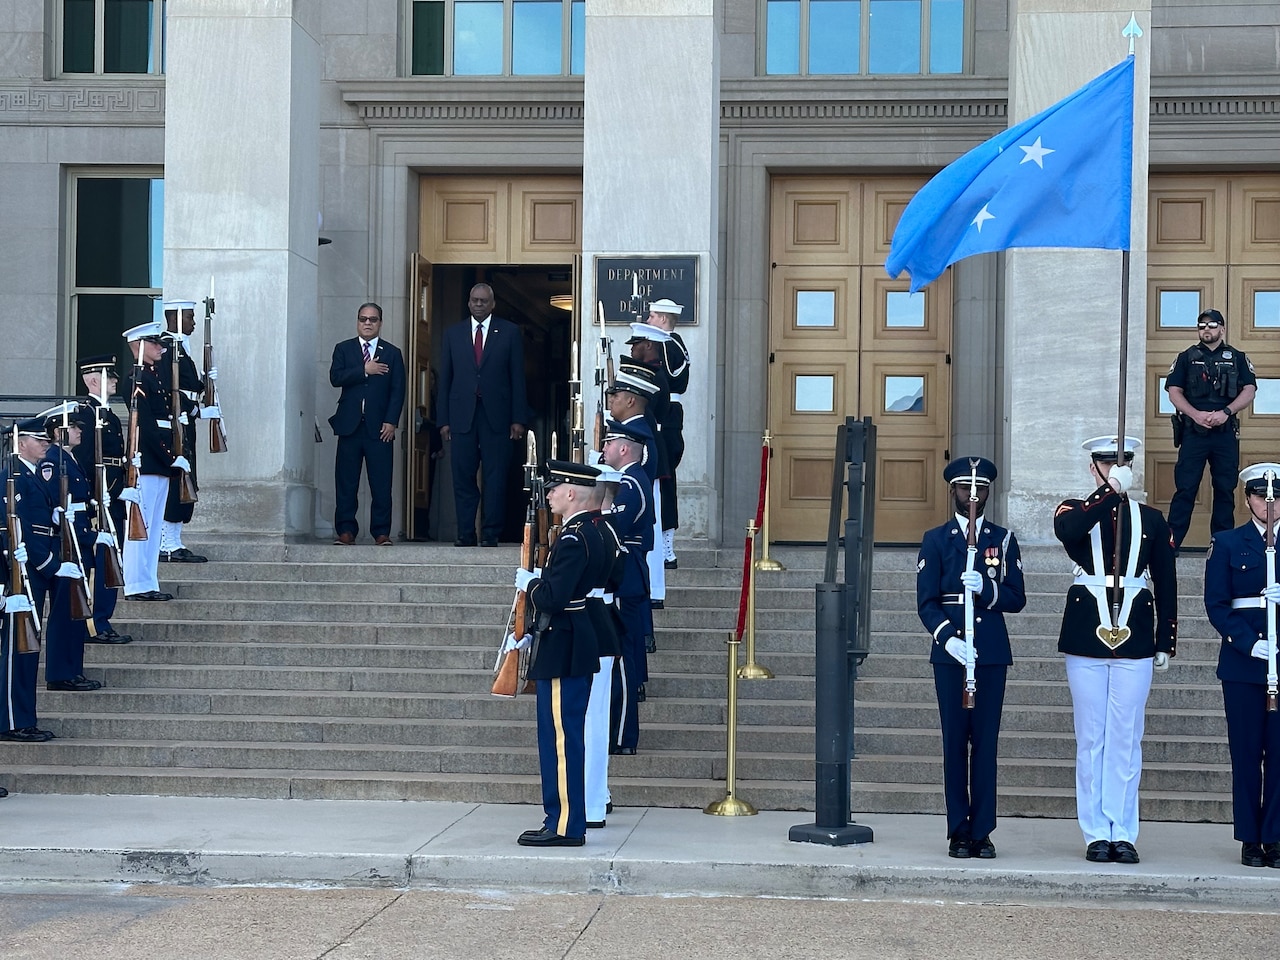 Two civilians stand on steps while flanked by a ceremonial detail of U.S. service members.